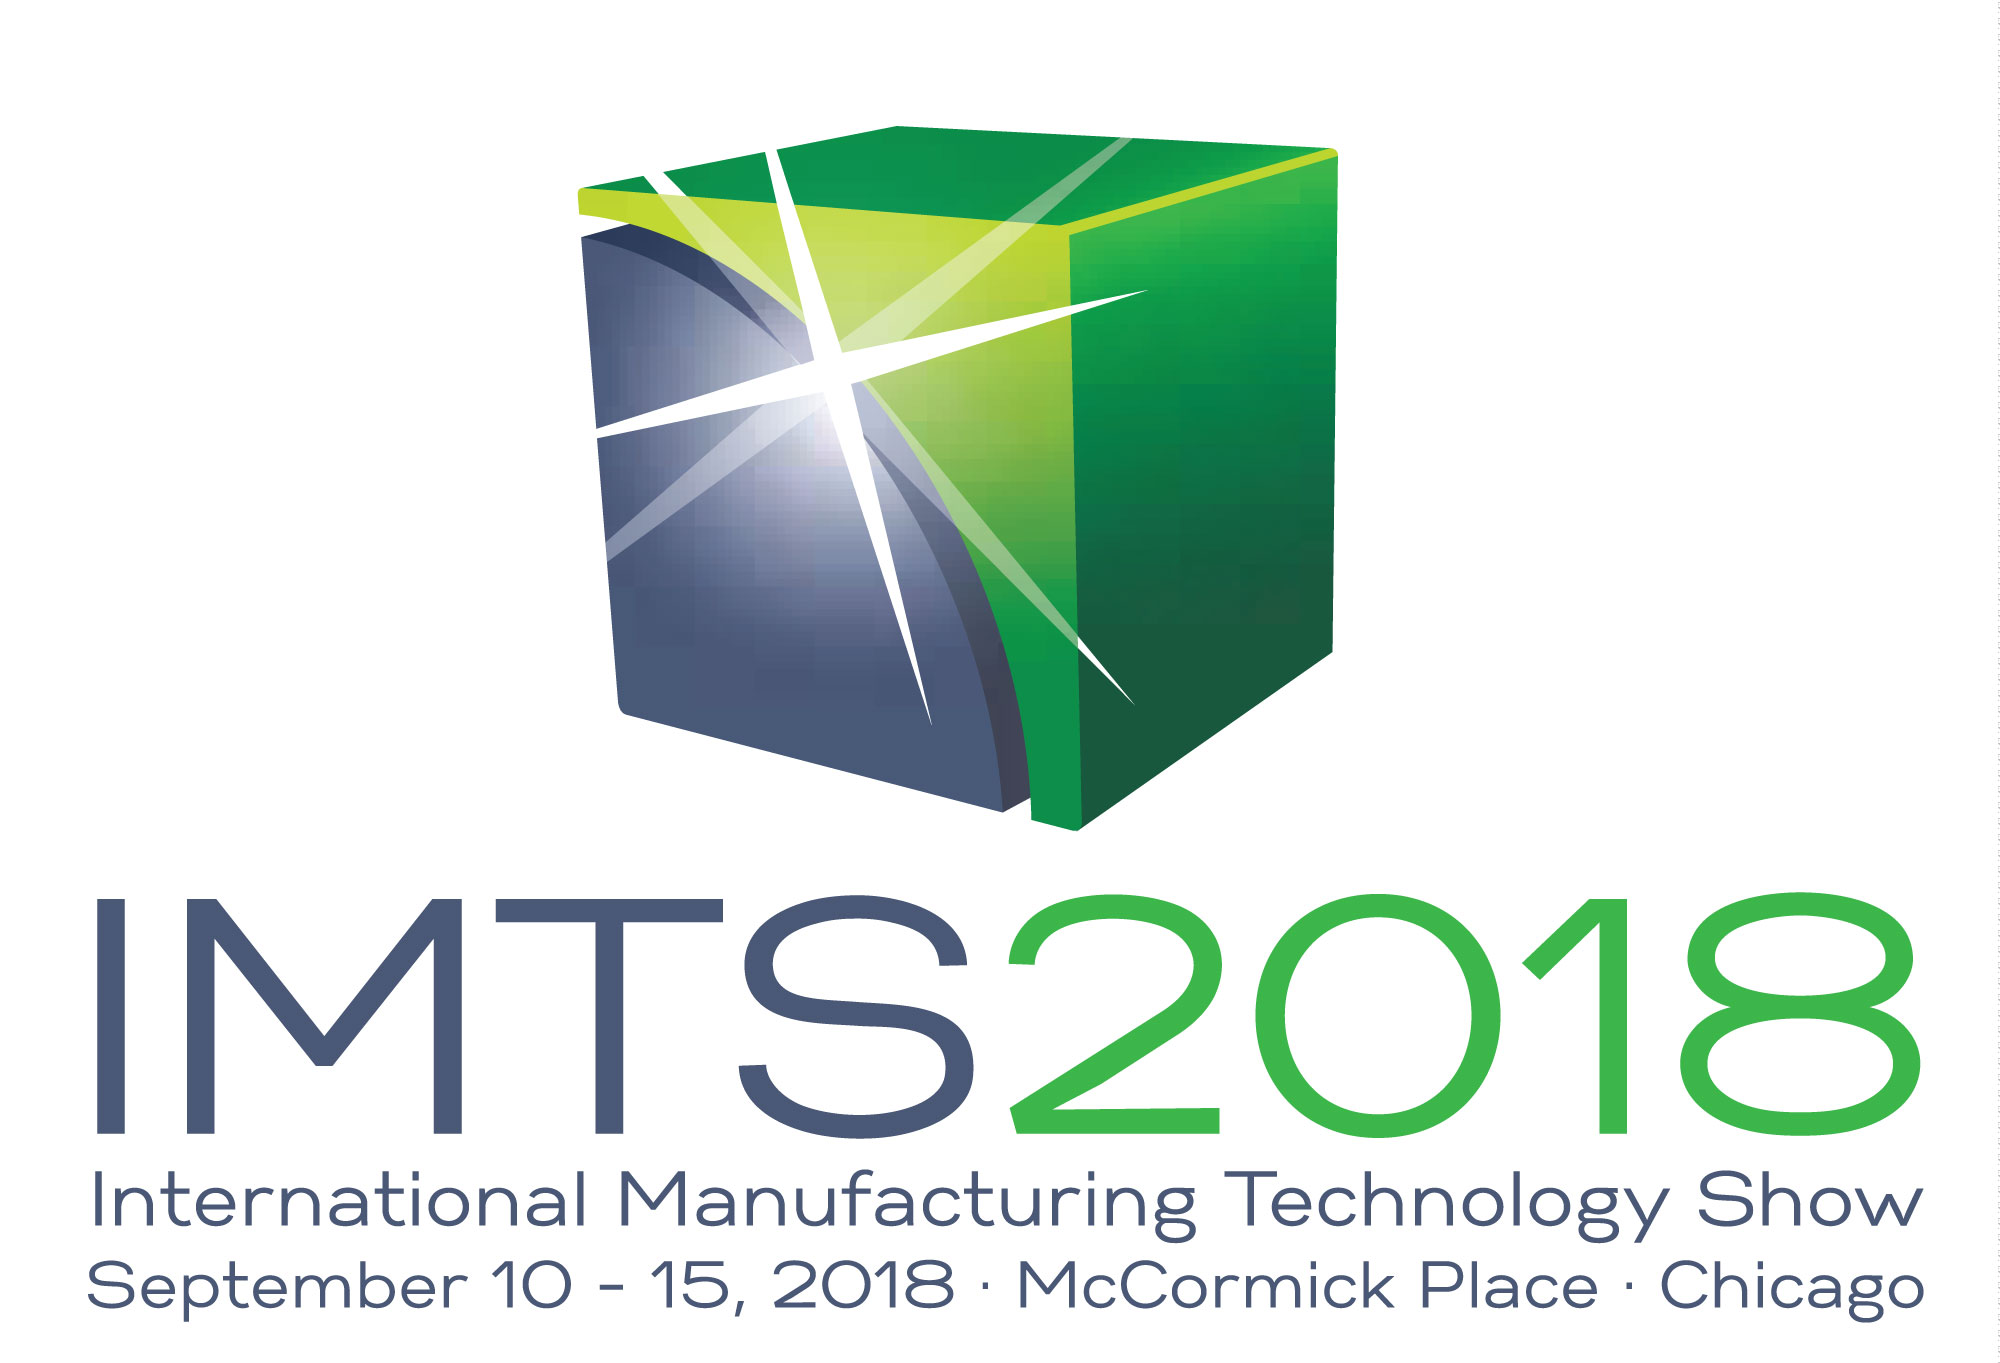 IMTS 2018, 10.–15. September 2018, McCormick Place, Chicago